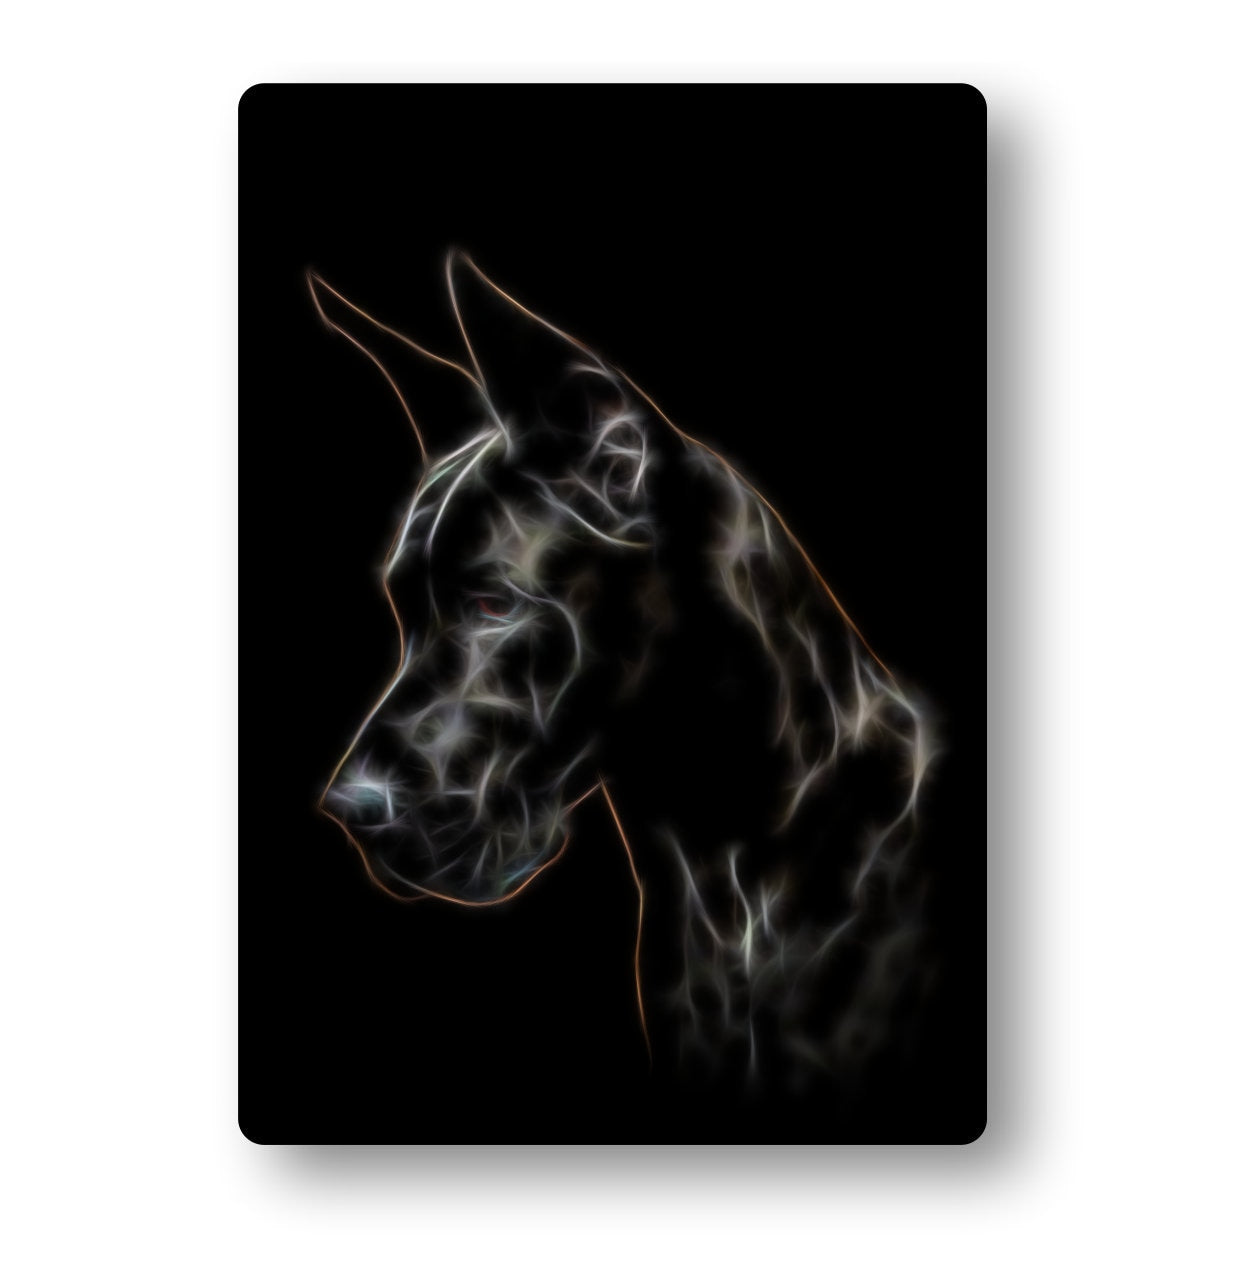 Great Dane Metal Wall Plaque. Also available as Mouse Pad, Keychain or Coaster.